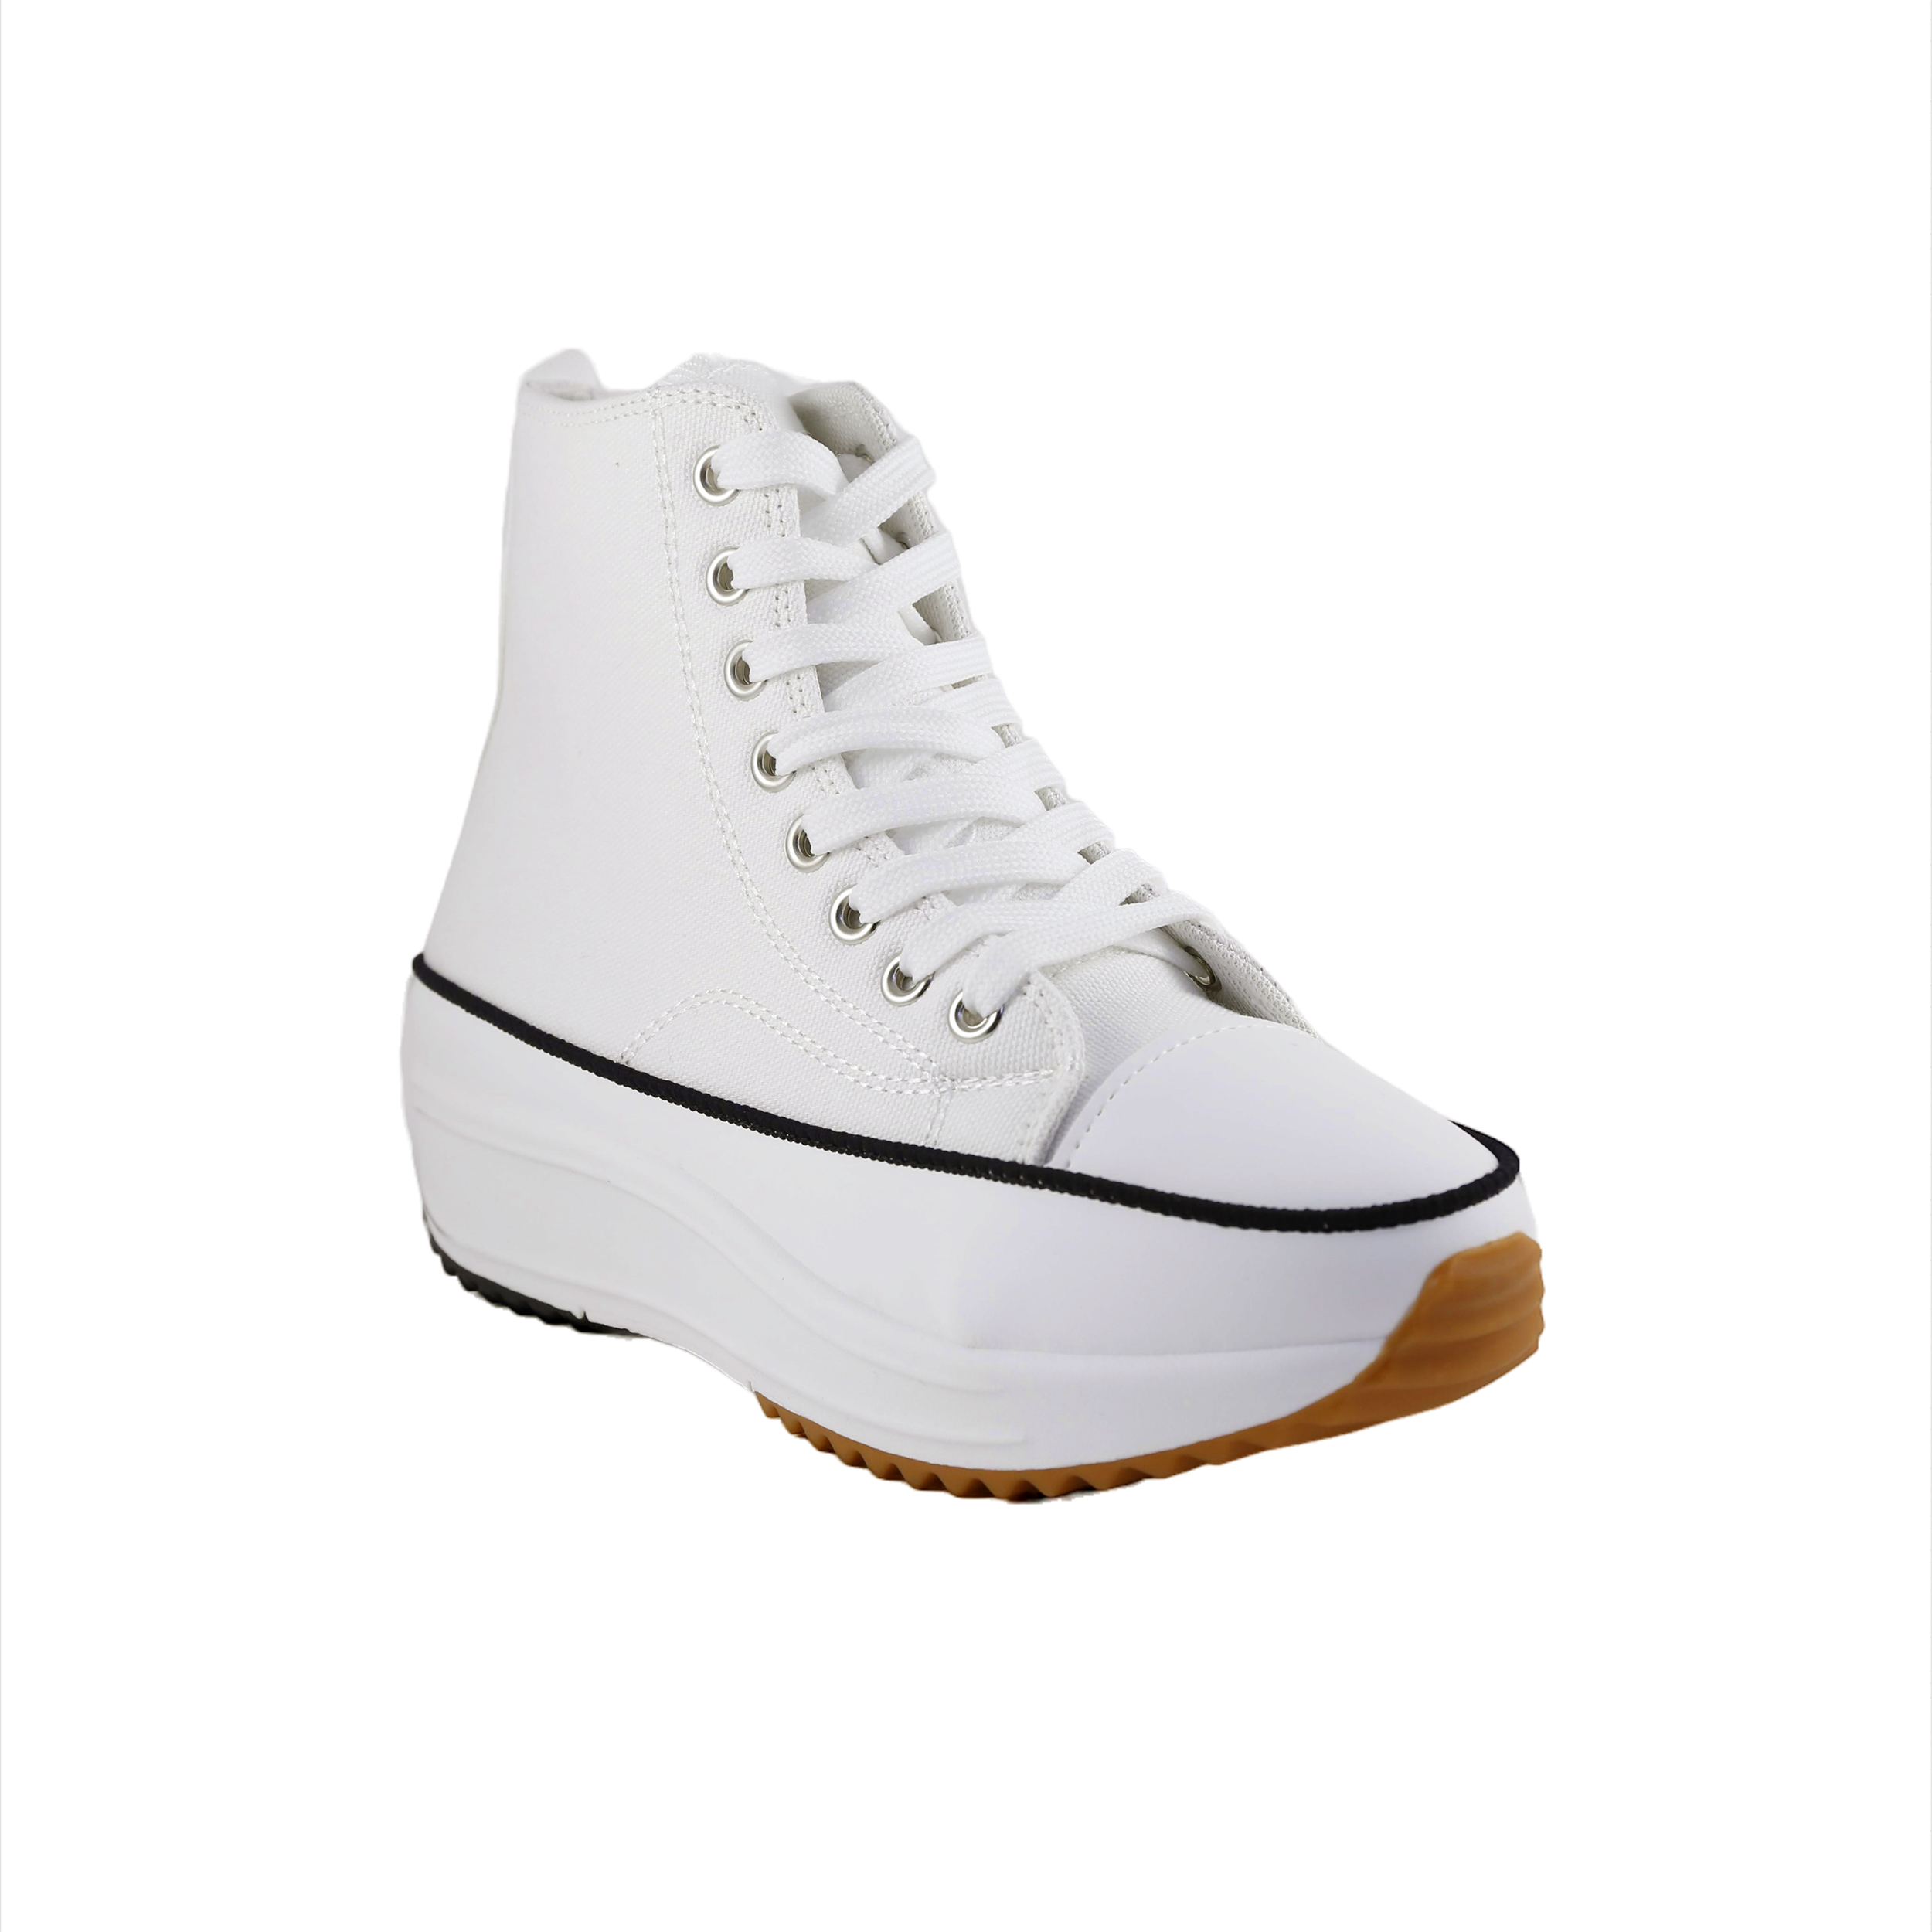 Woman Shoes Casual-Sneakers Booties SW149